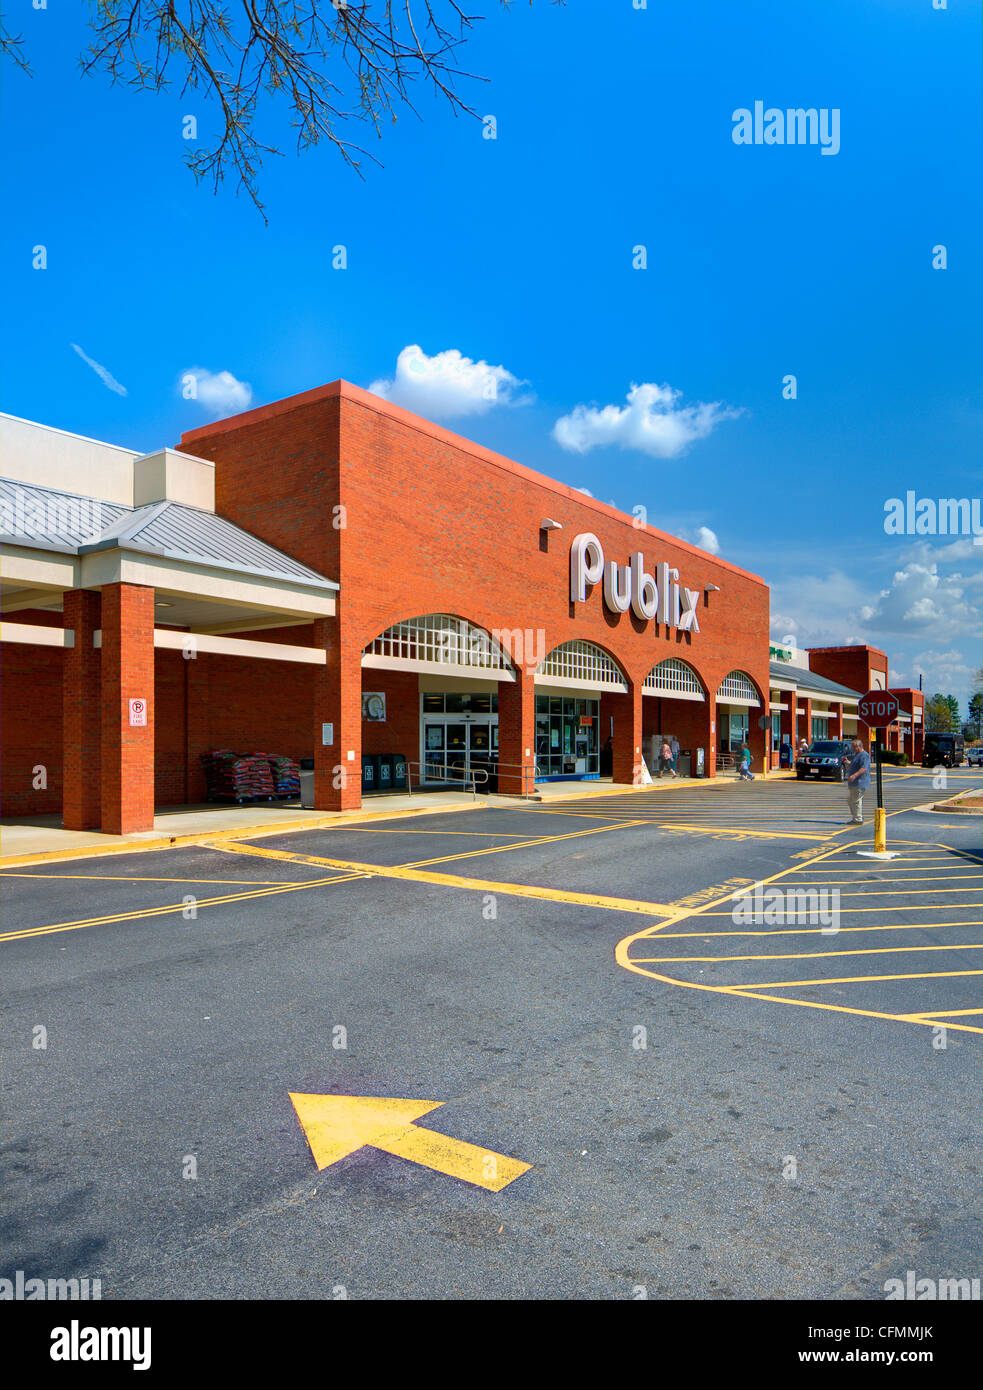 Publix is an American-based supermarket chain. Stock Photo